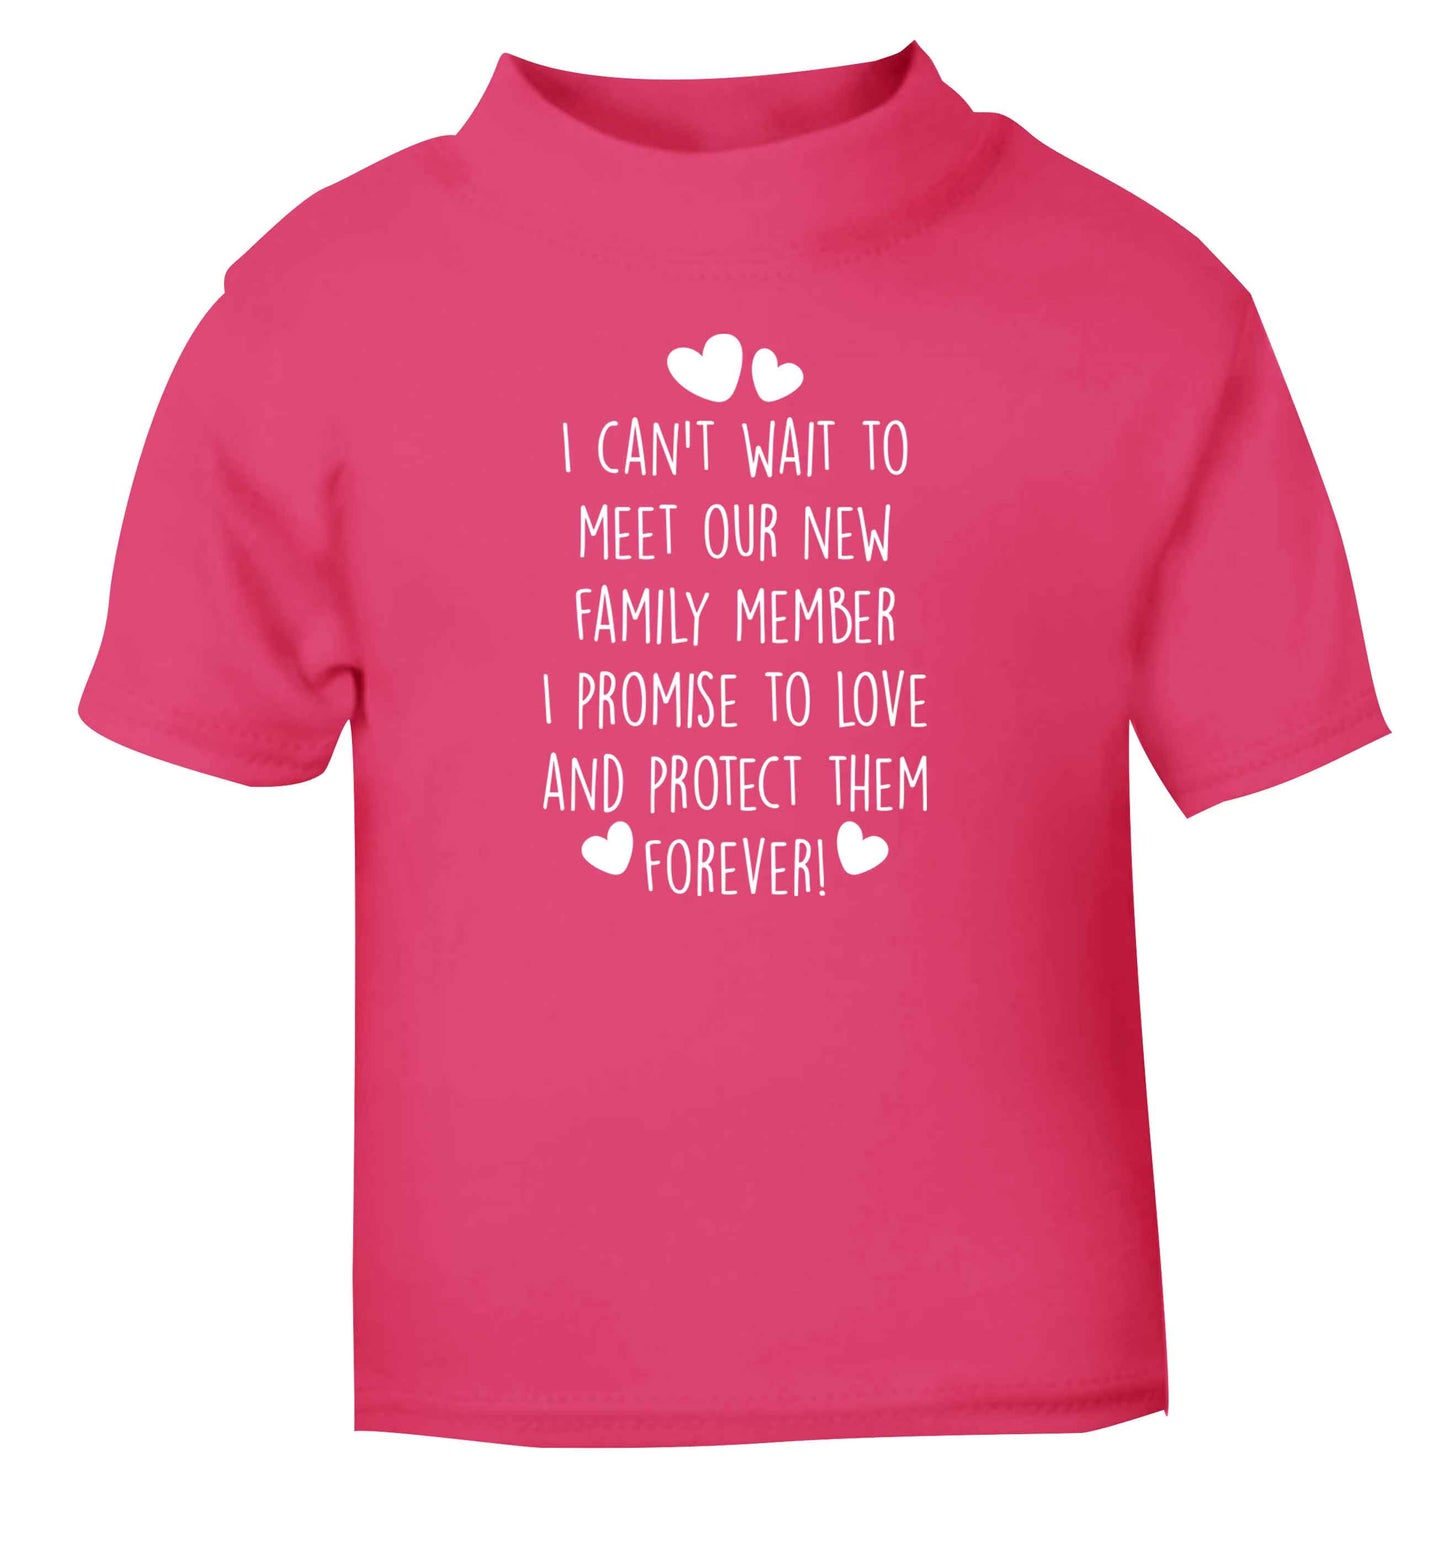 I can't wait to meet our new family member I promise to love and protect them foreverpink Baby Toddler Tshirt 2 Years